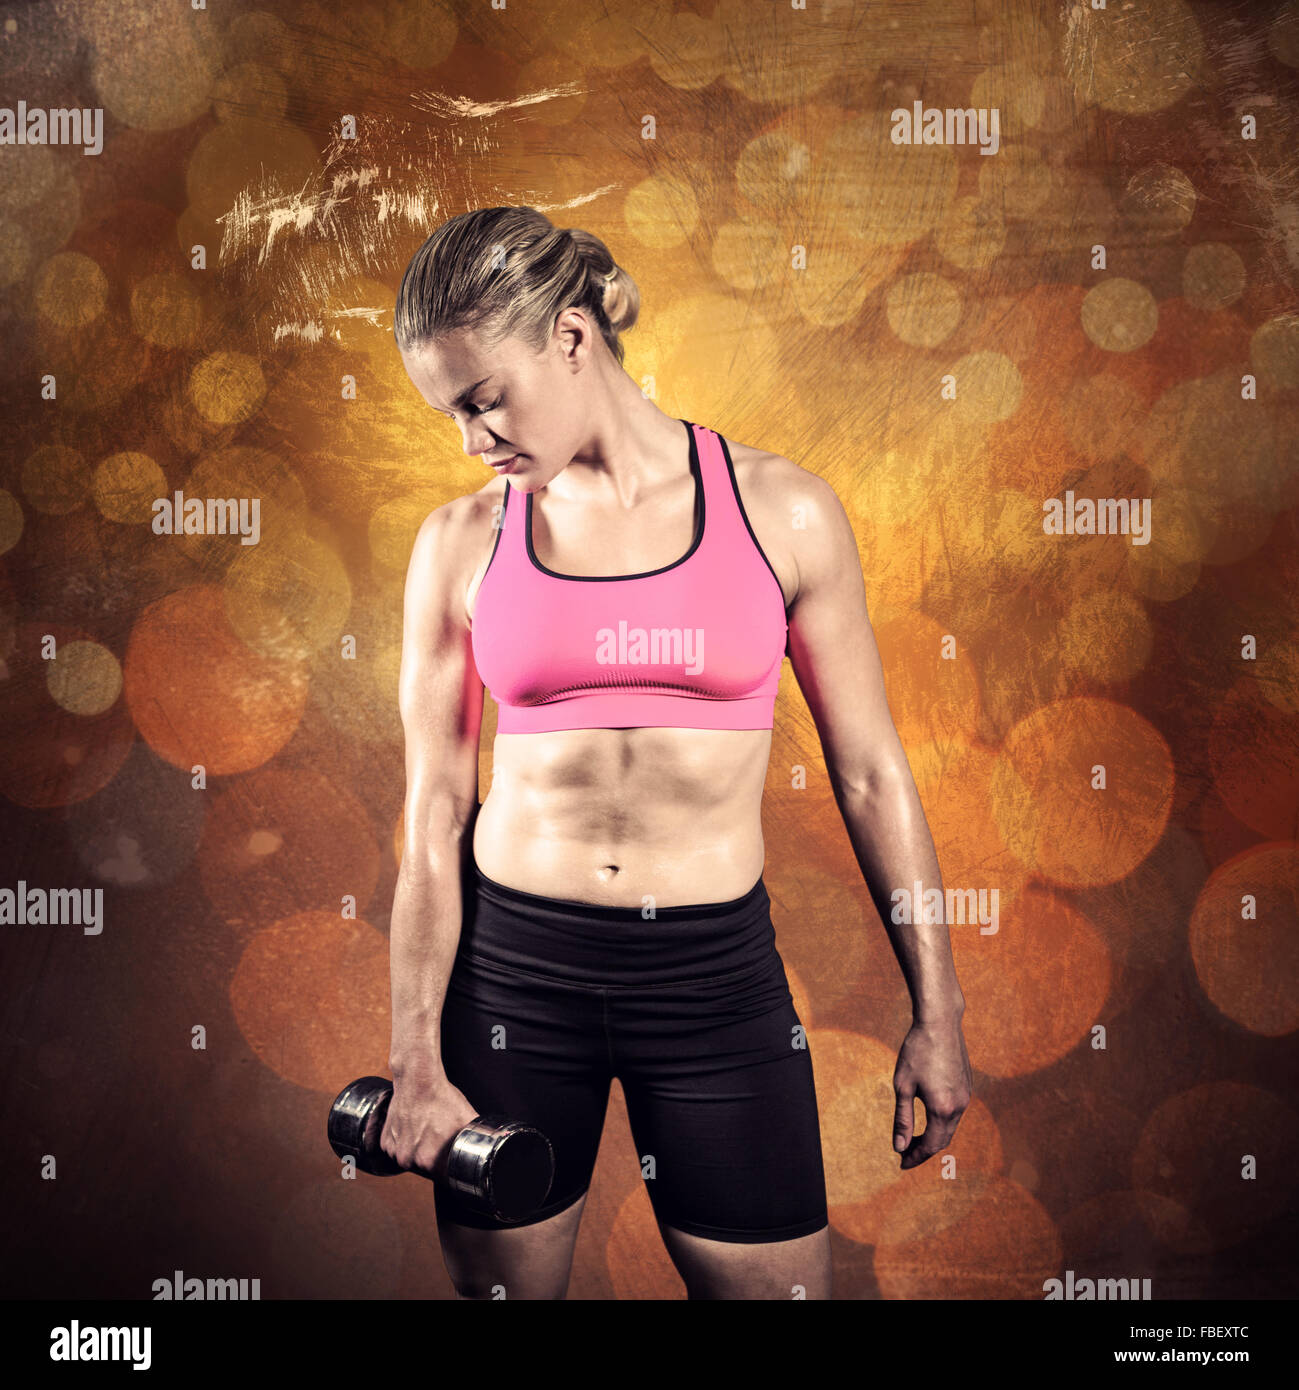 Composite image of muscular woman lifting heavy dumbbell Stock Photo